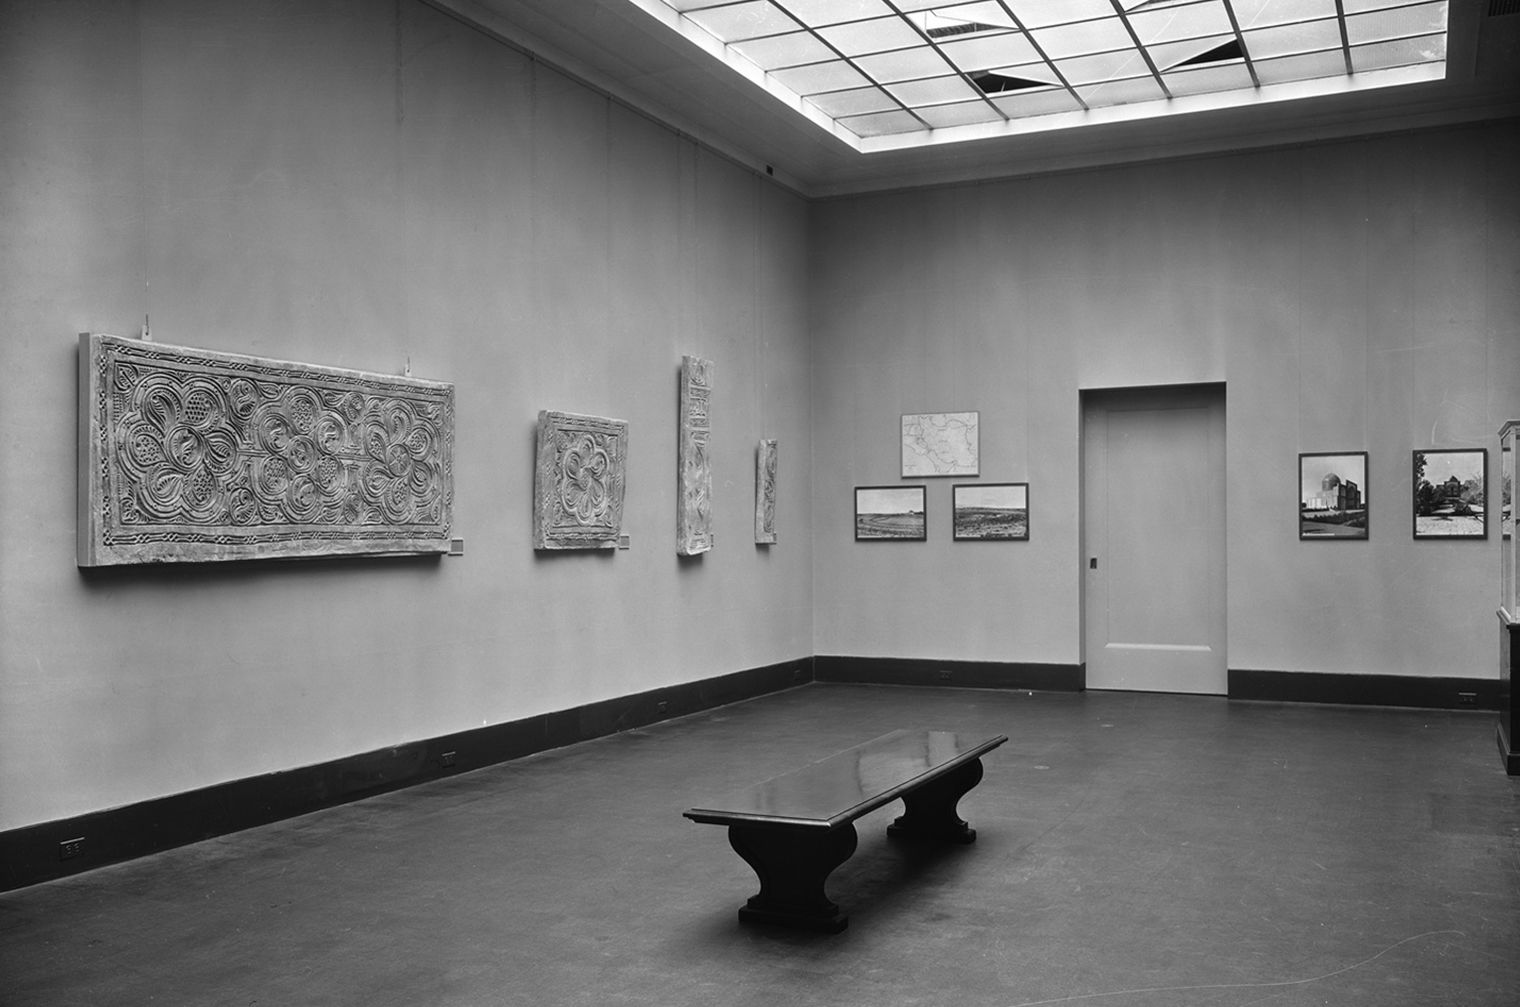 Black and white photo of a gallery from 1937 with a bench in the middle and stucco panels on the wall